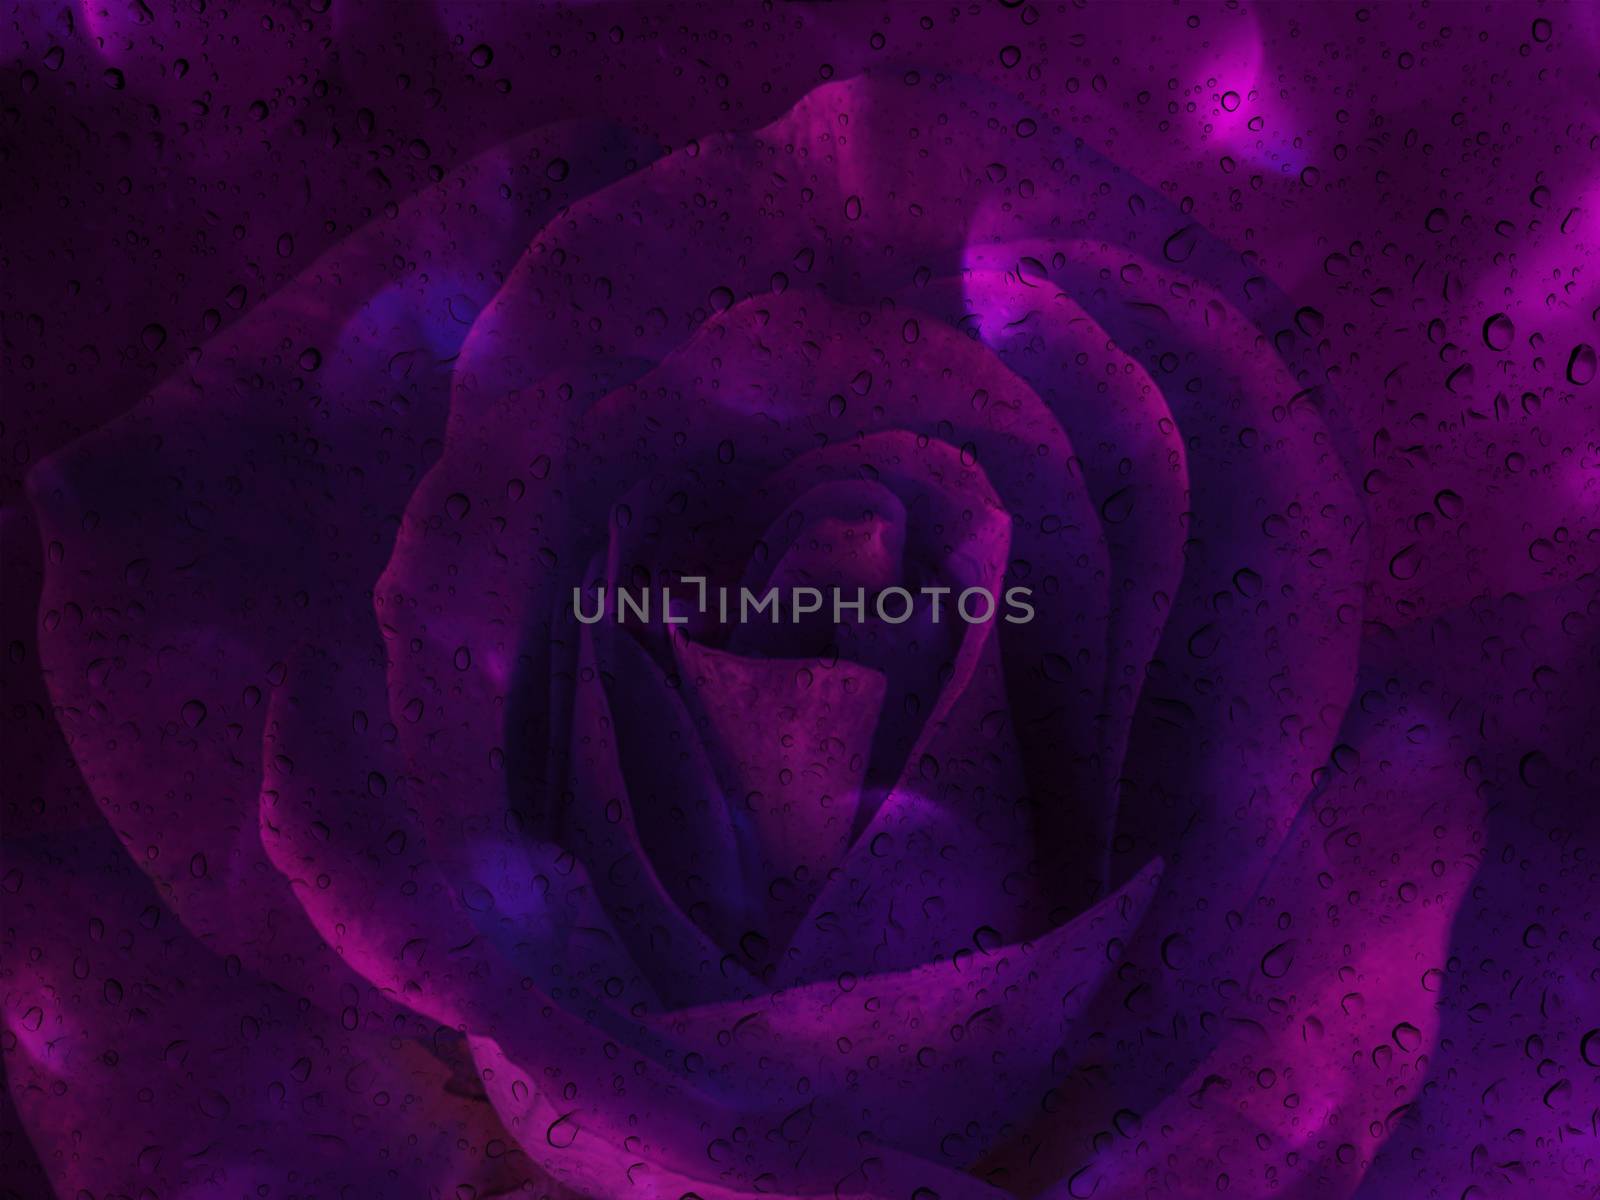 Romantic violet rose with water drop on glass mirror plate for abstract valentine background